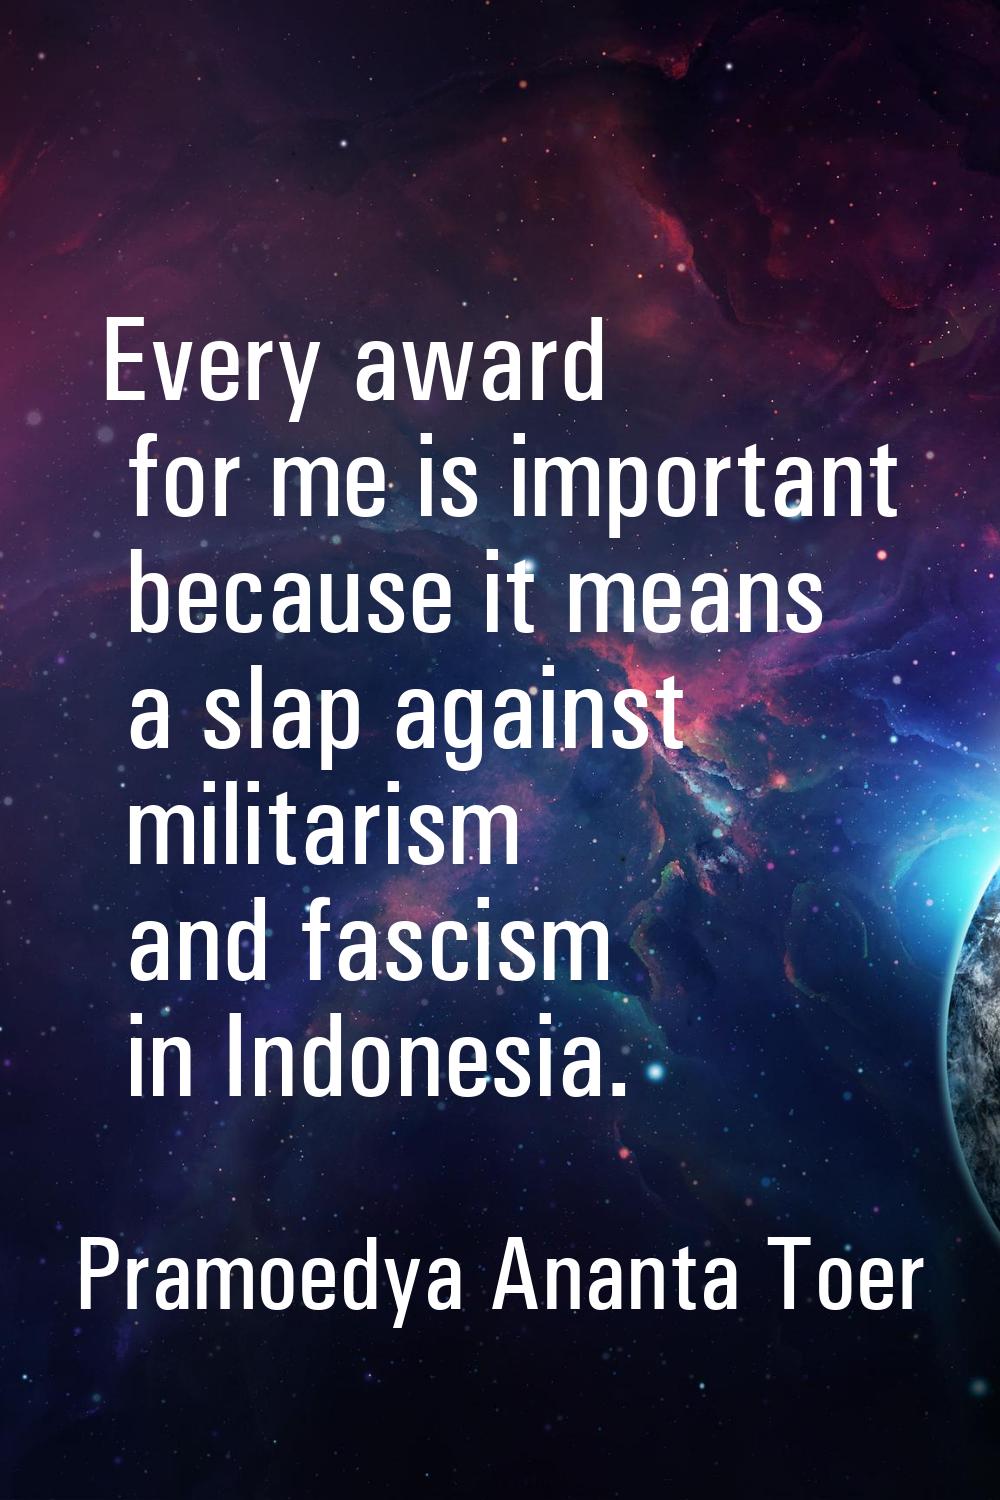 Every award for me is important because it means a slap against militarism and fascism in Indonesia